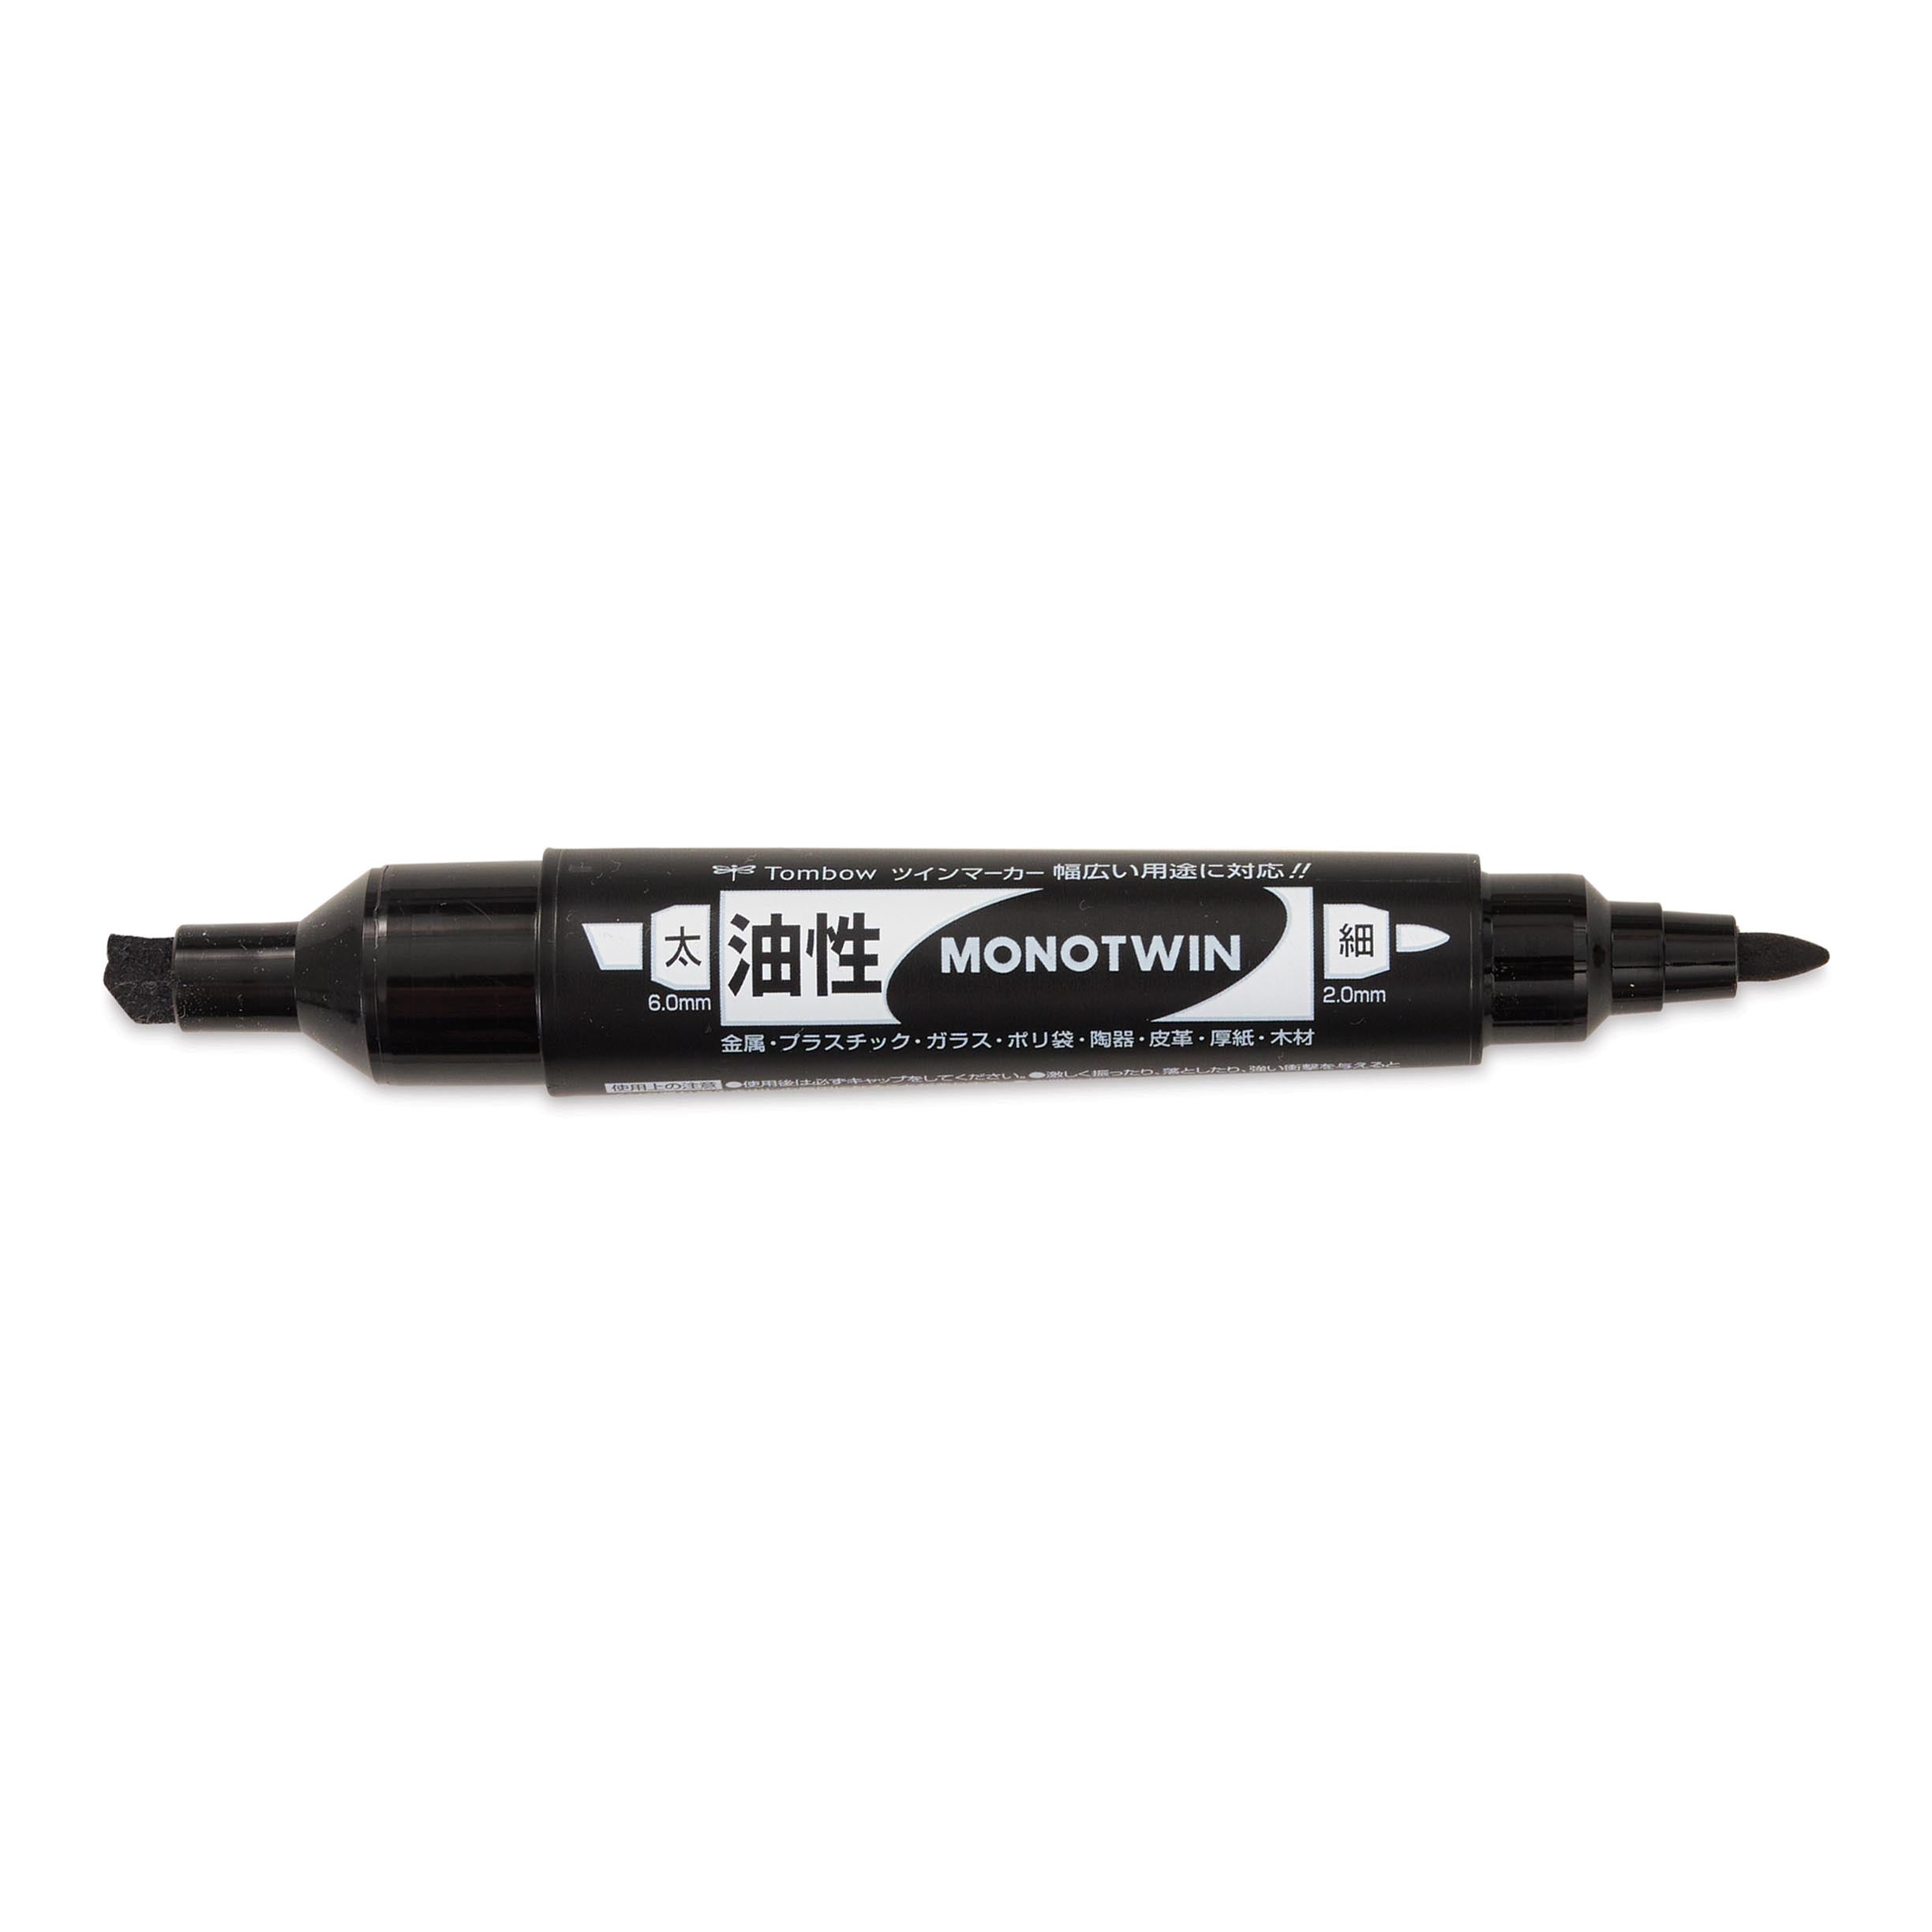 Tombow MONO Twin Permanent Marker, Fine & Chisel Tips